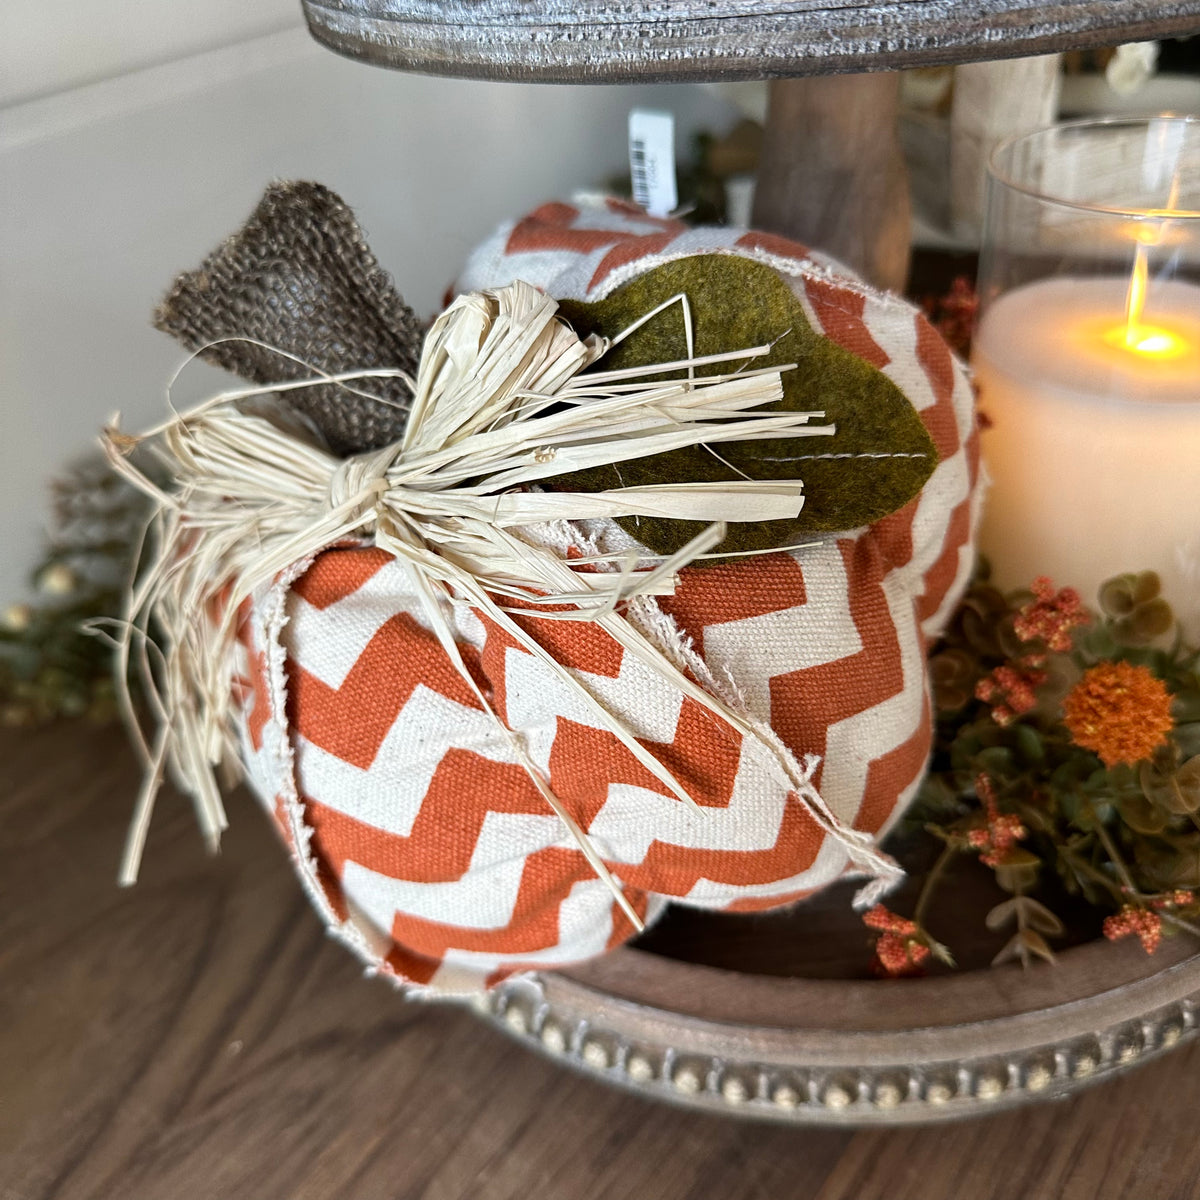 Tiered Pumpkin &amp; Candle Setting | Autumn Tabletop Display